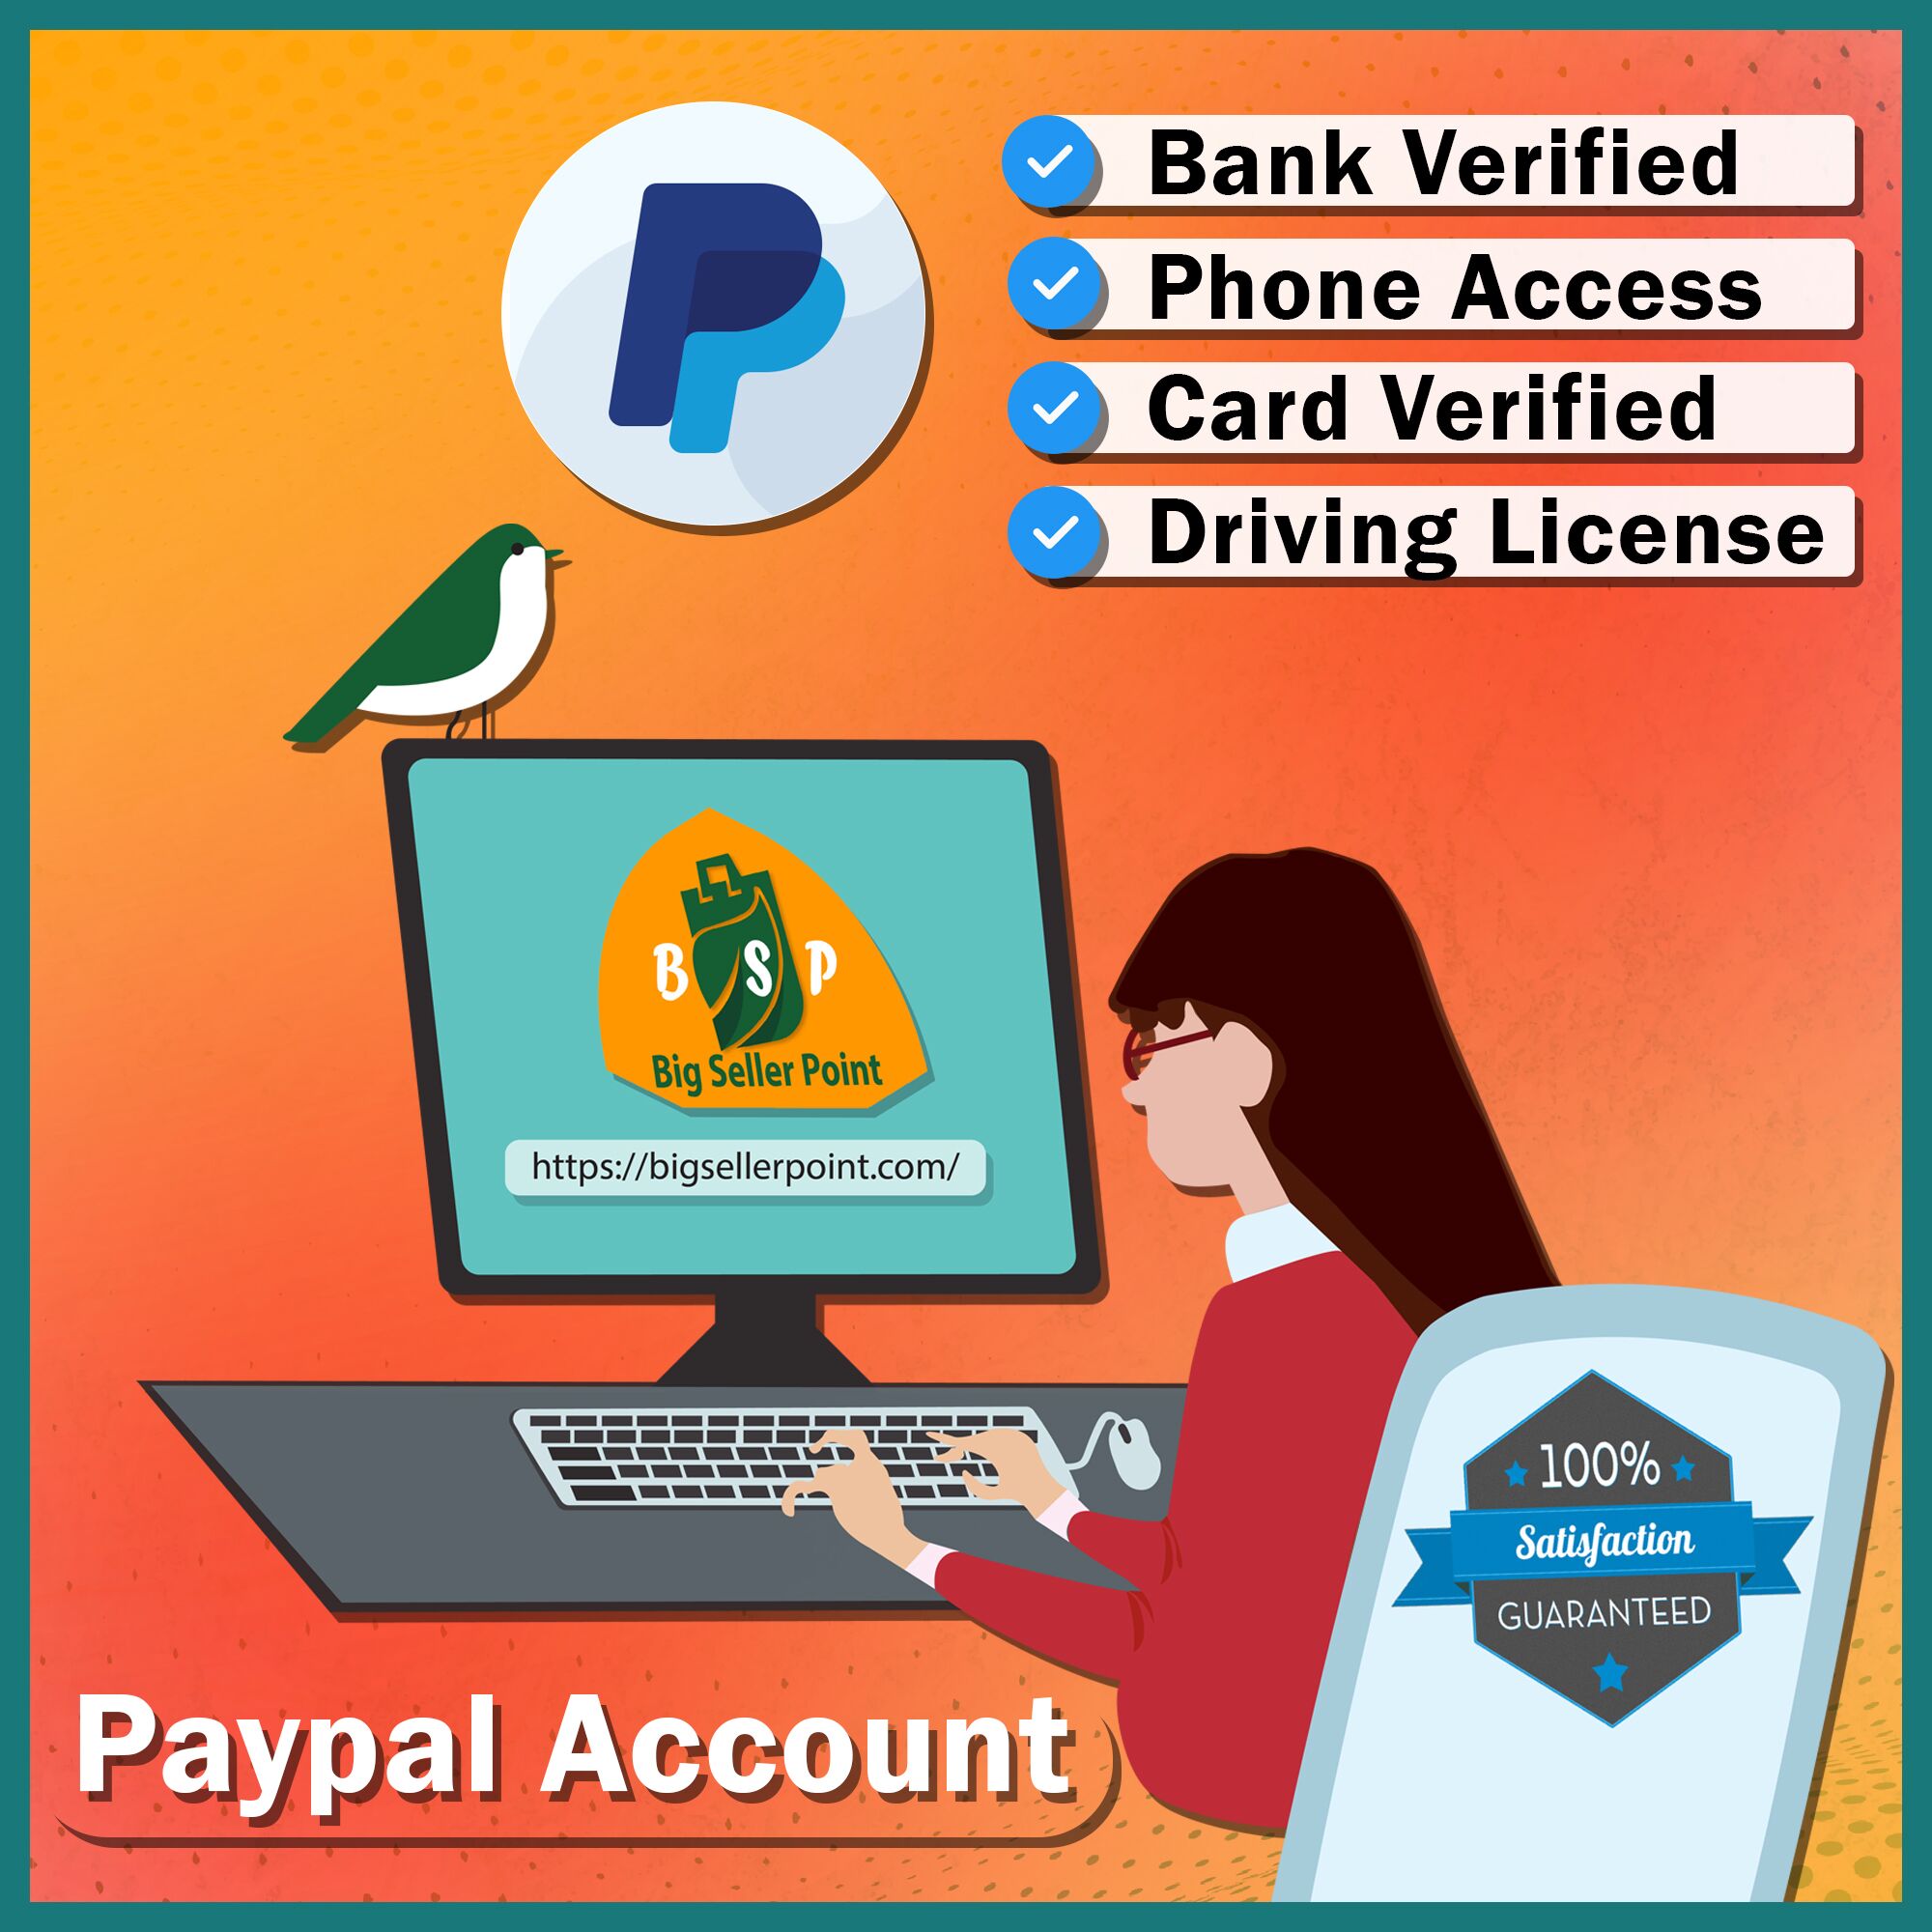 Buy Verified Paypal Account